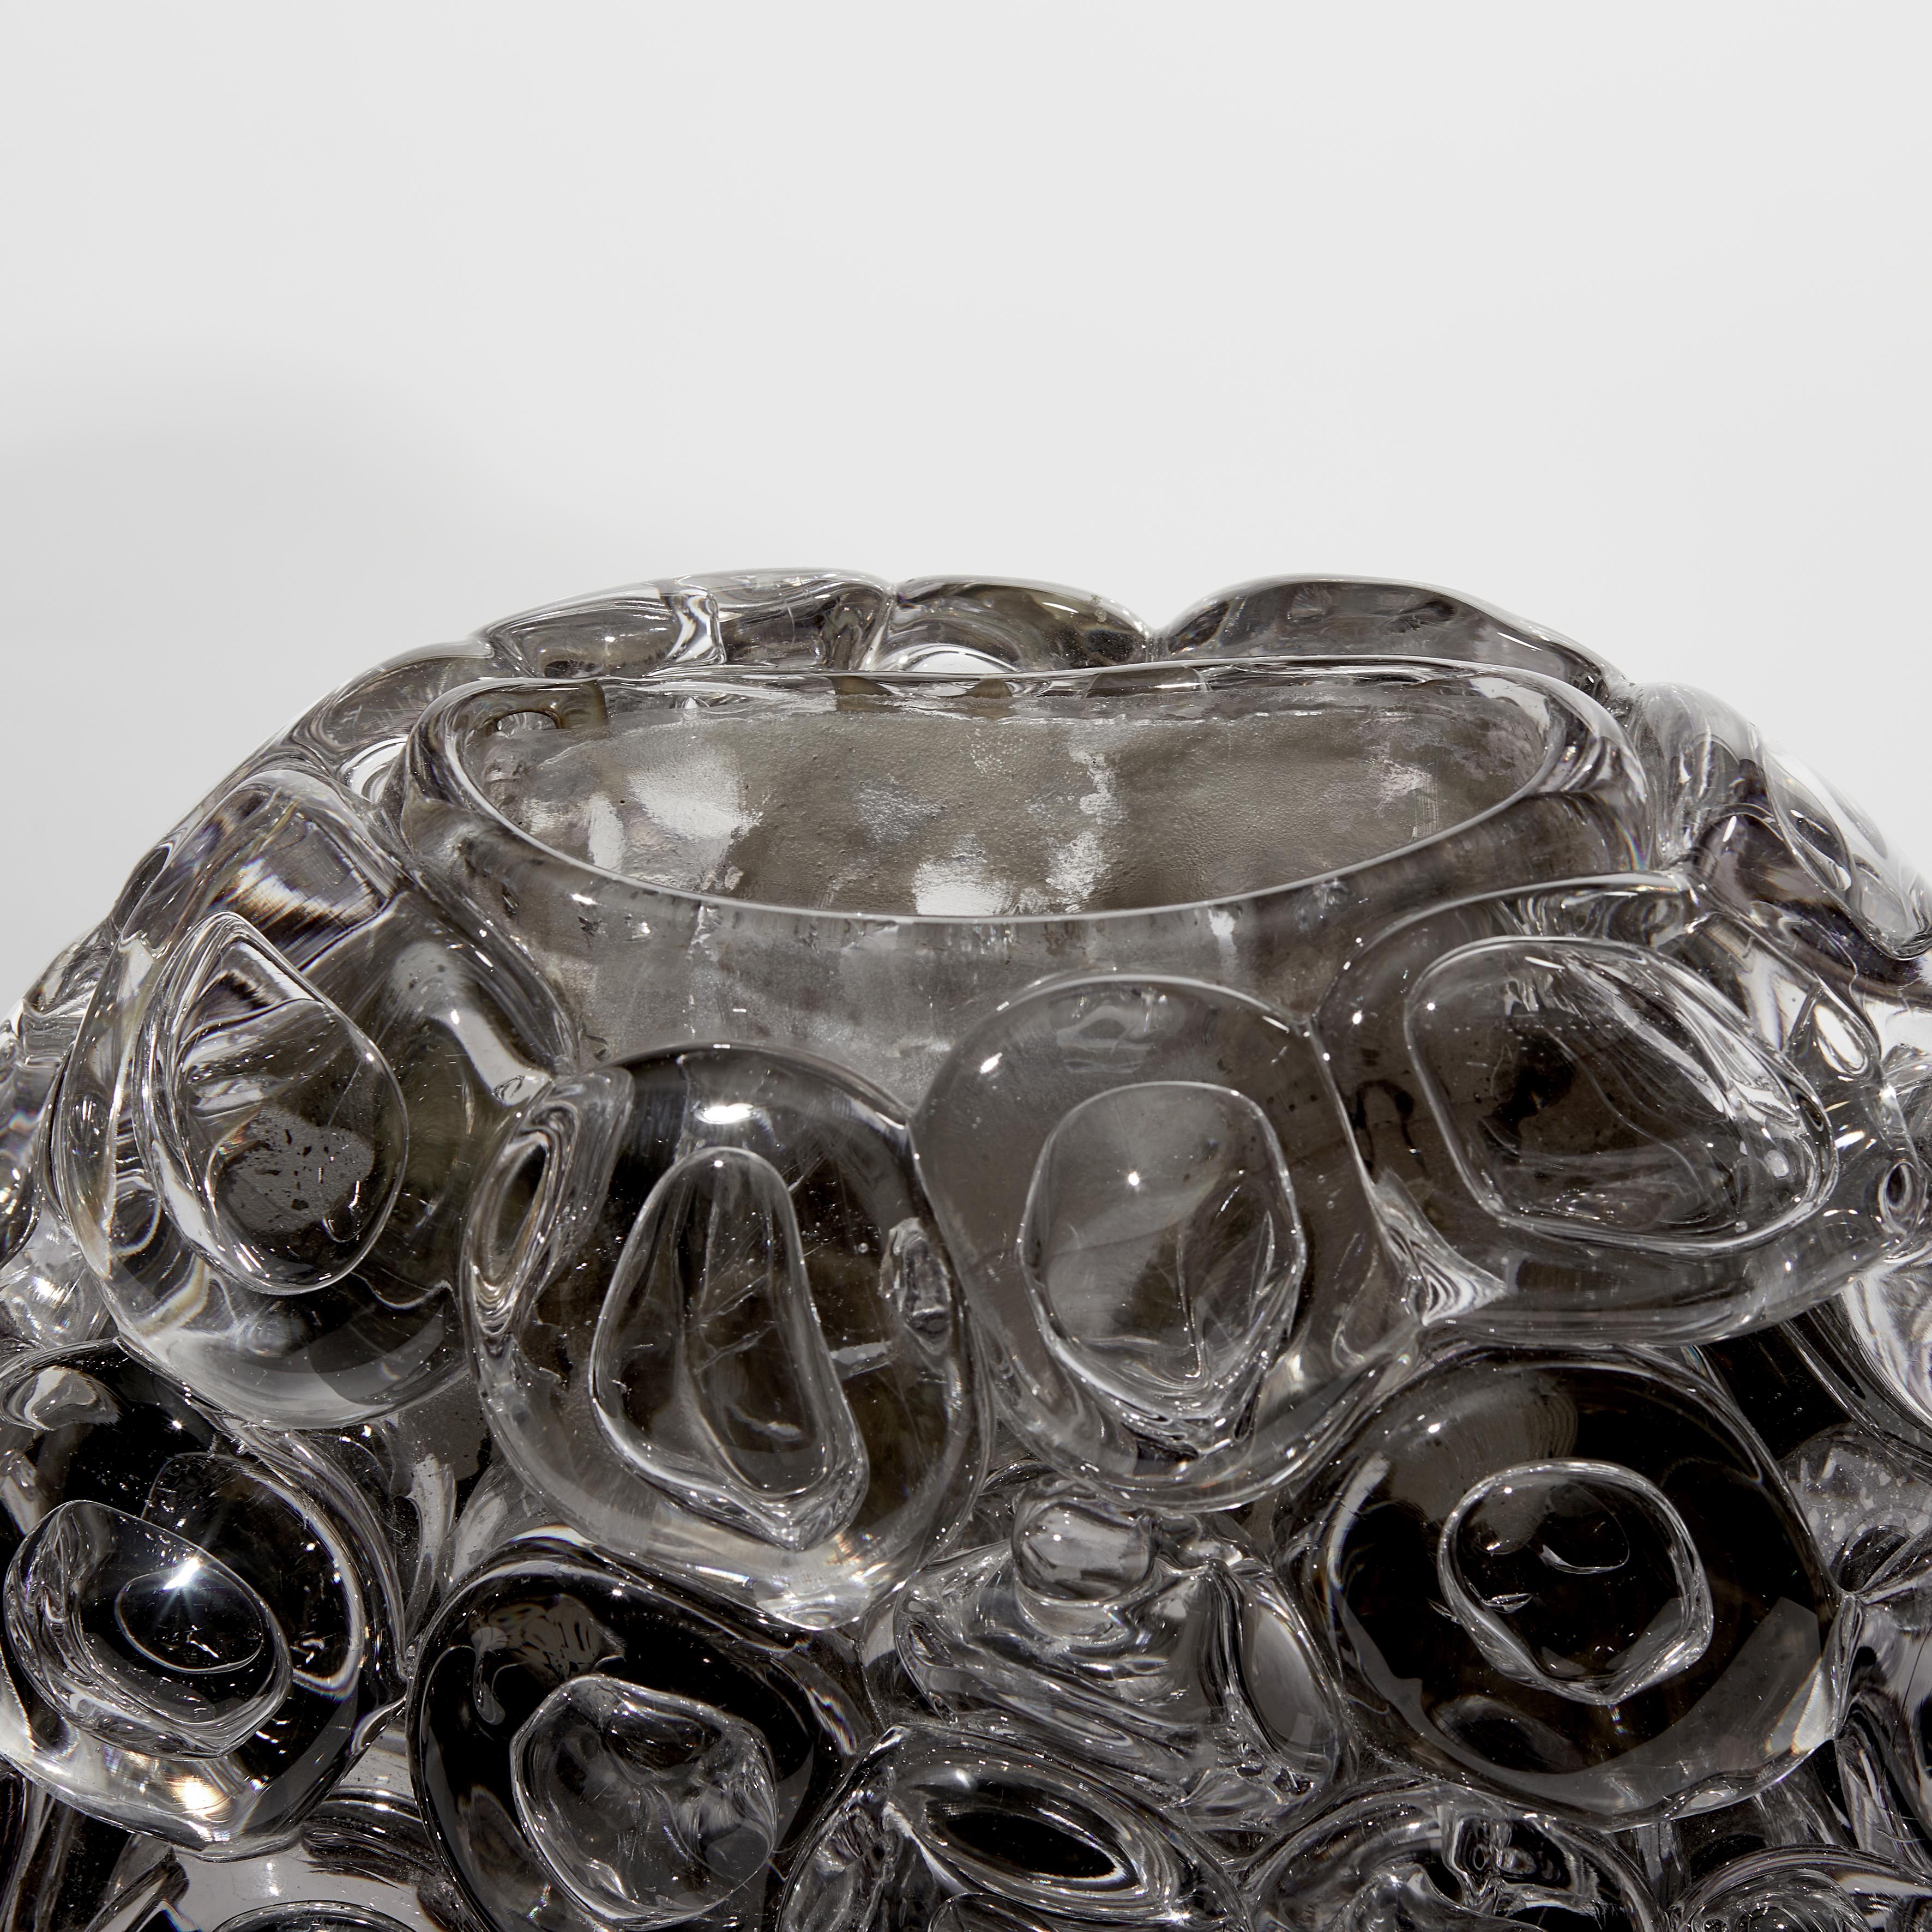 Bubblewrap in Monochrome I, a Silver and Clear Glass Vase by Allister Malcolm 2